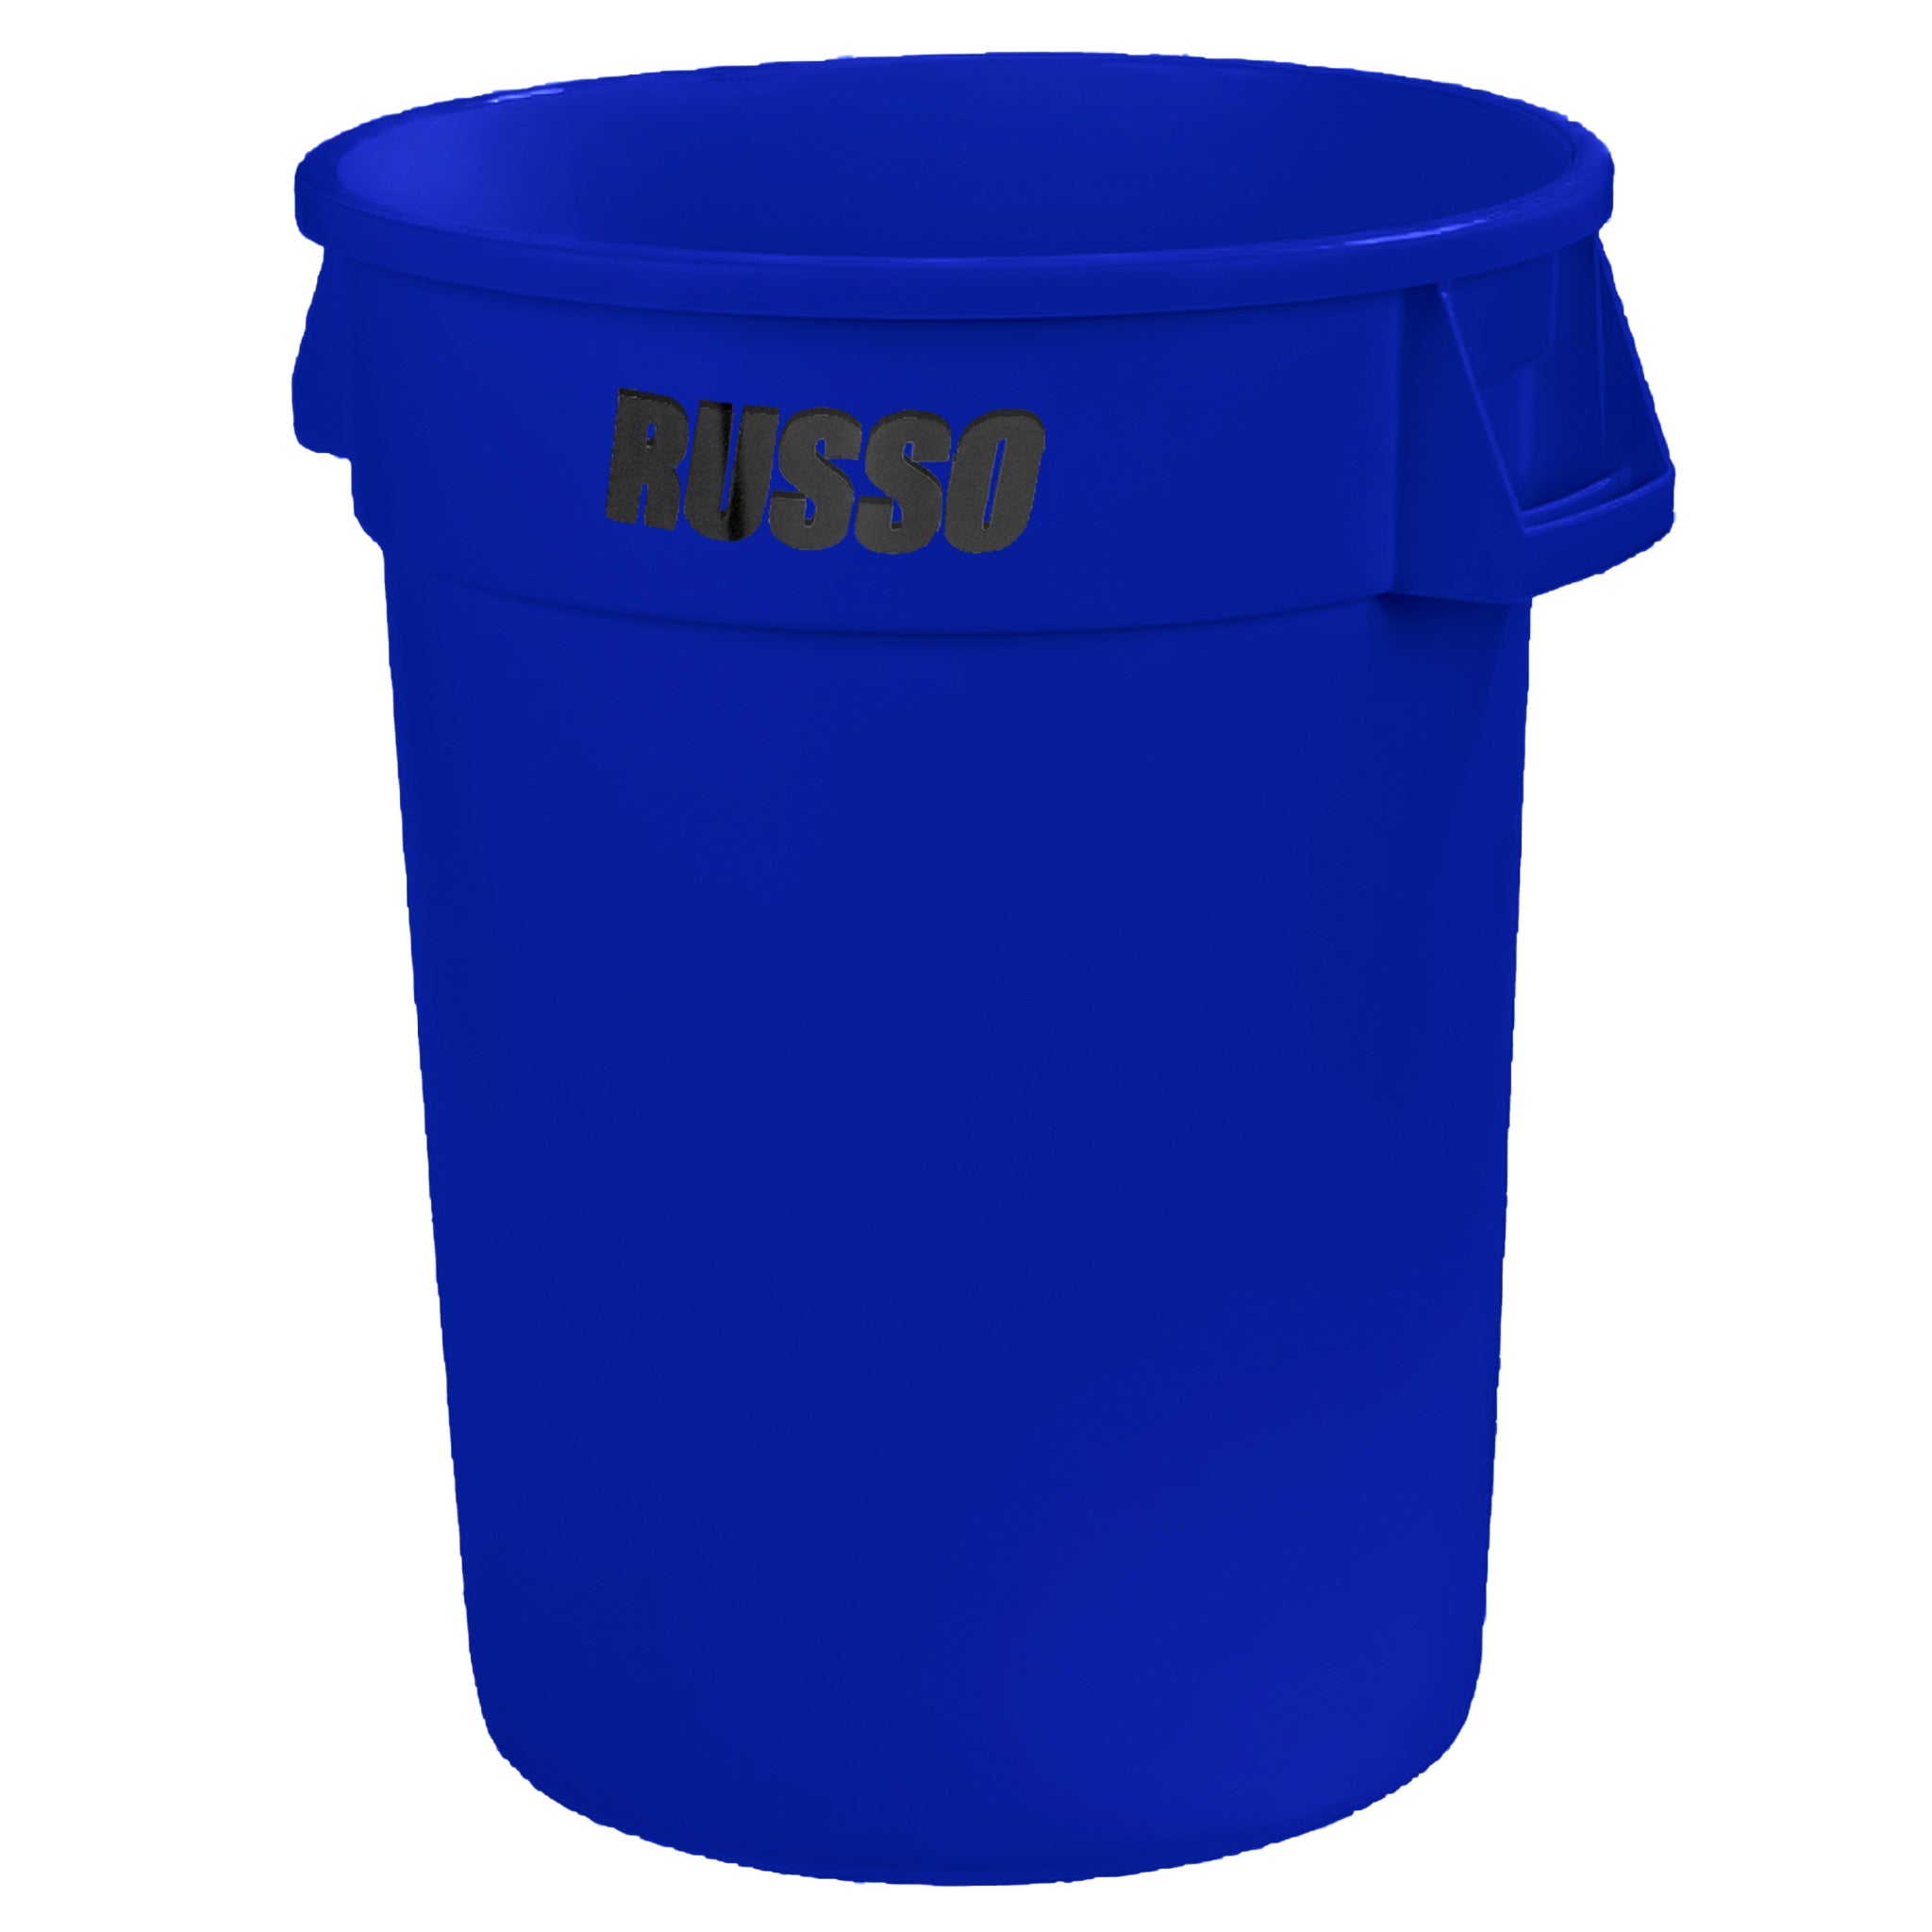 RUSSO Glow Garbage Can 32 Gallon - Blue